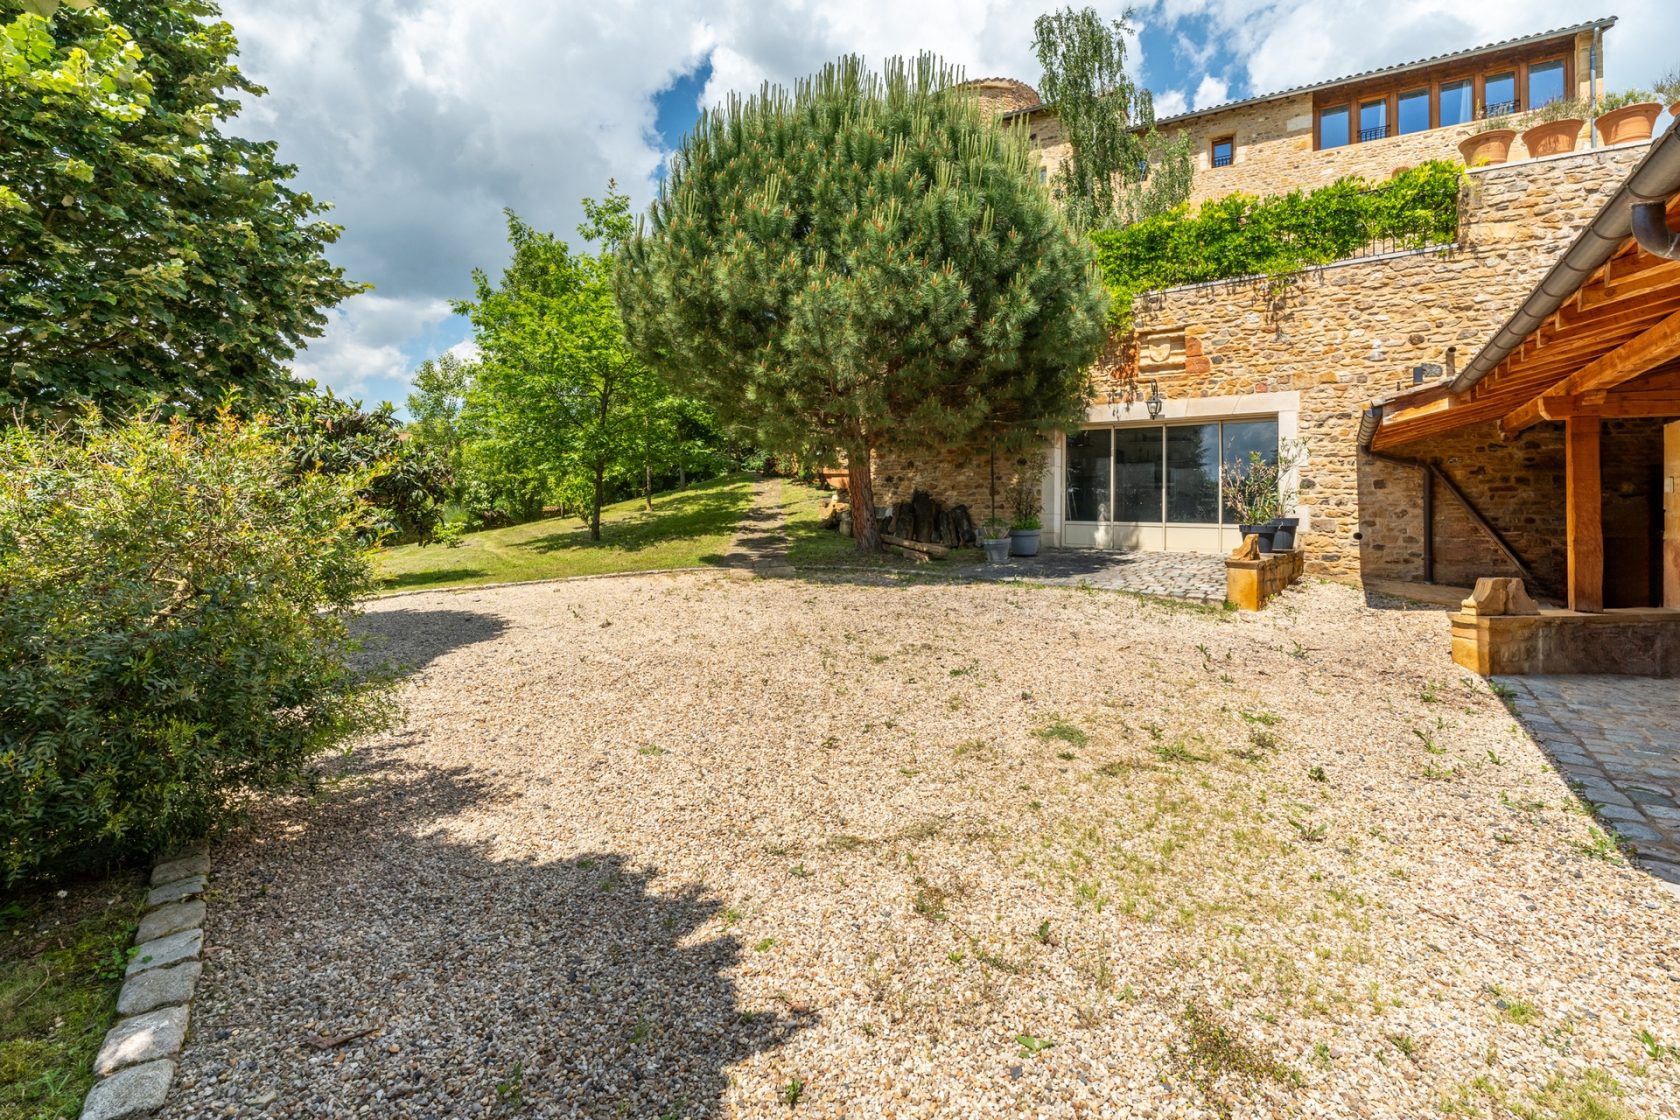 Exceptional Property combining Charm and History in the heart of the Pierres Dorées